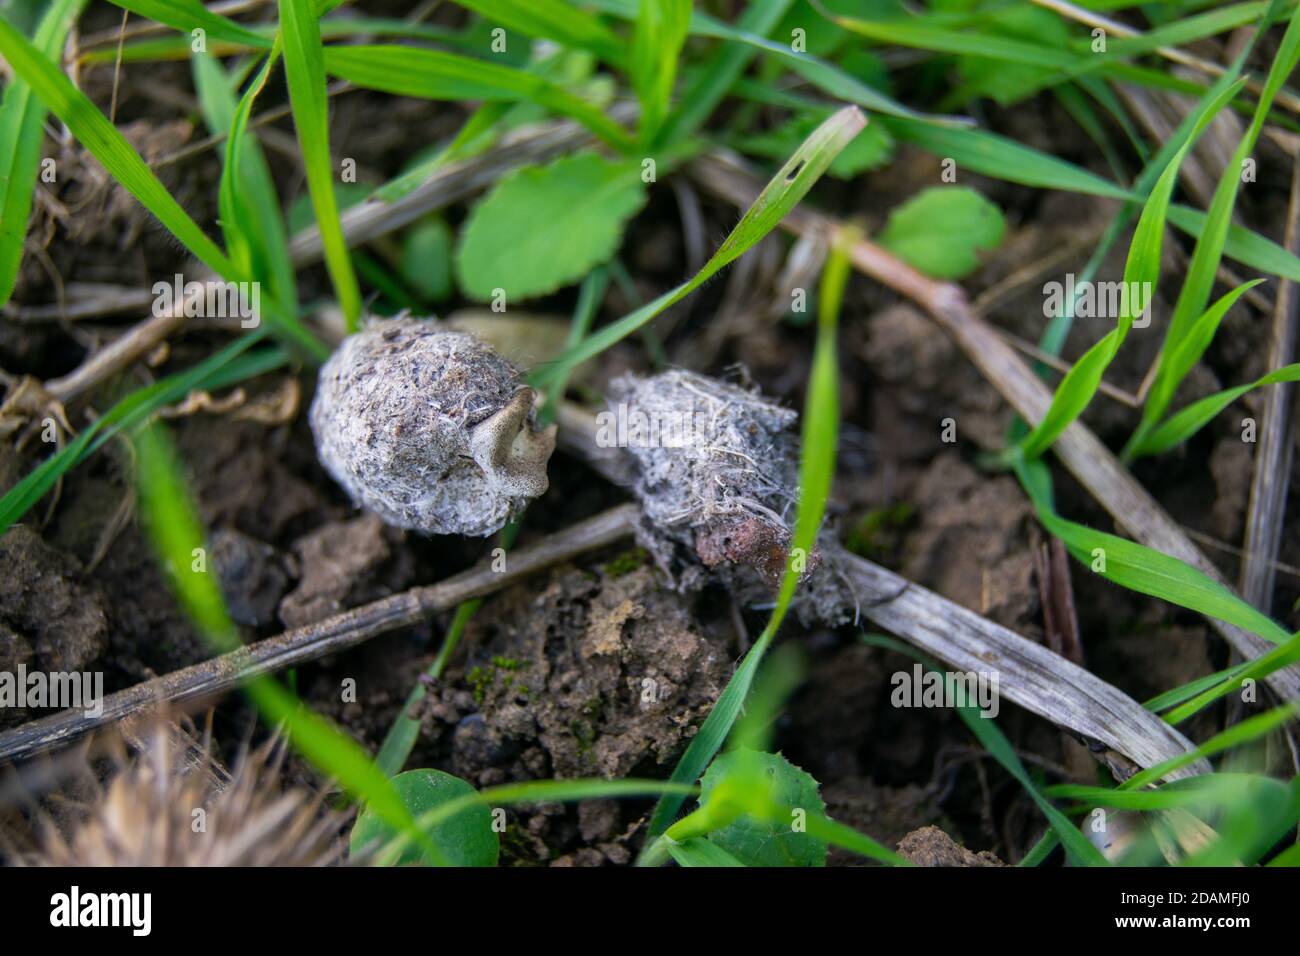 Owl pellet laying on the field, bird of prey pellets with fur and bones sticking out, indigested parts of animals eaten by olws, owl spit, vomit Stock Photo